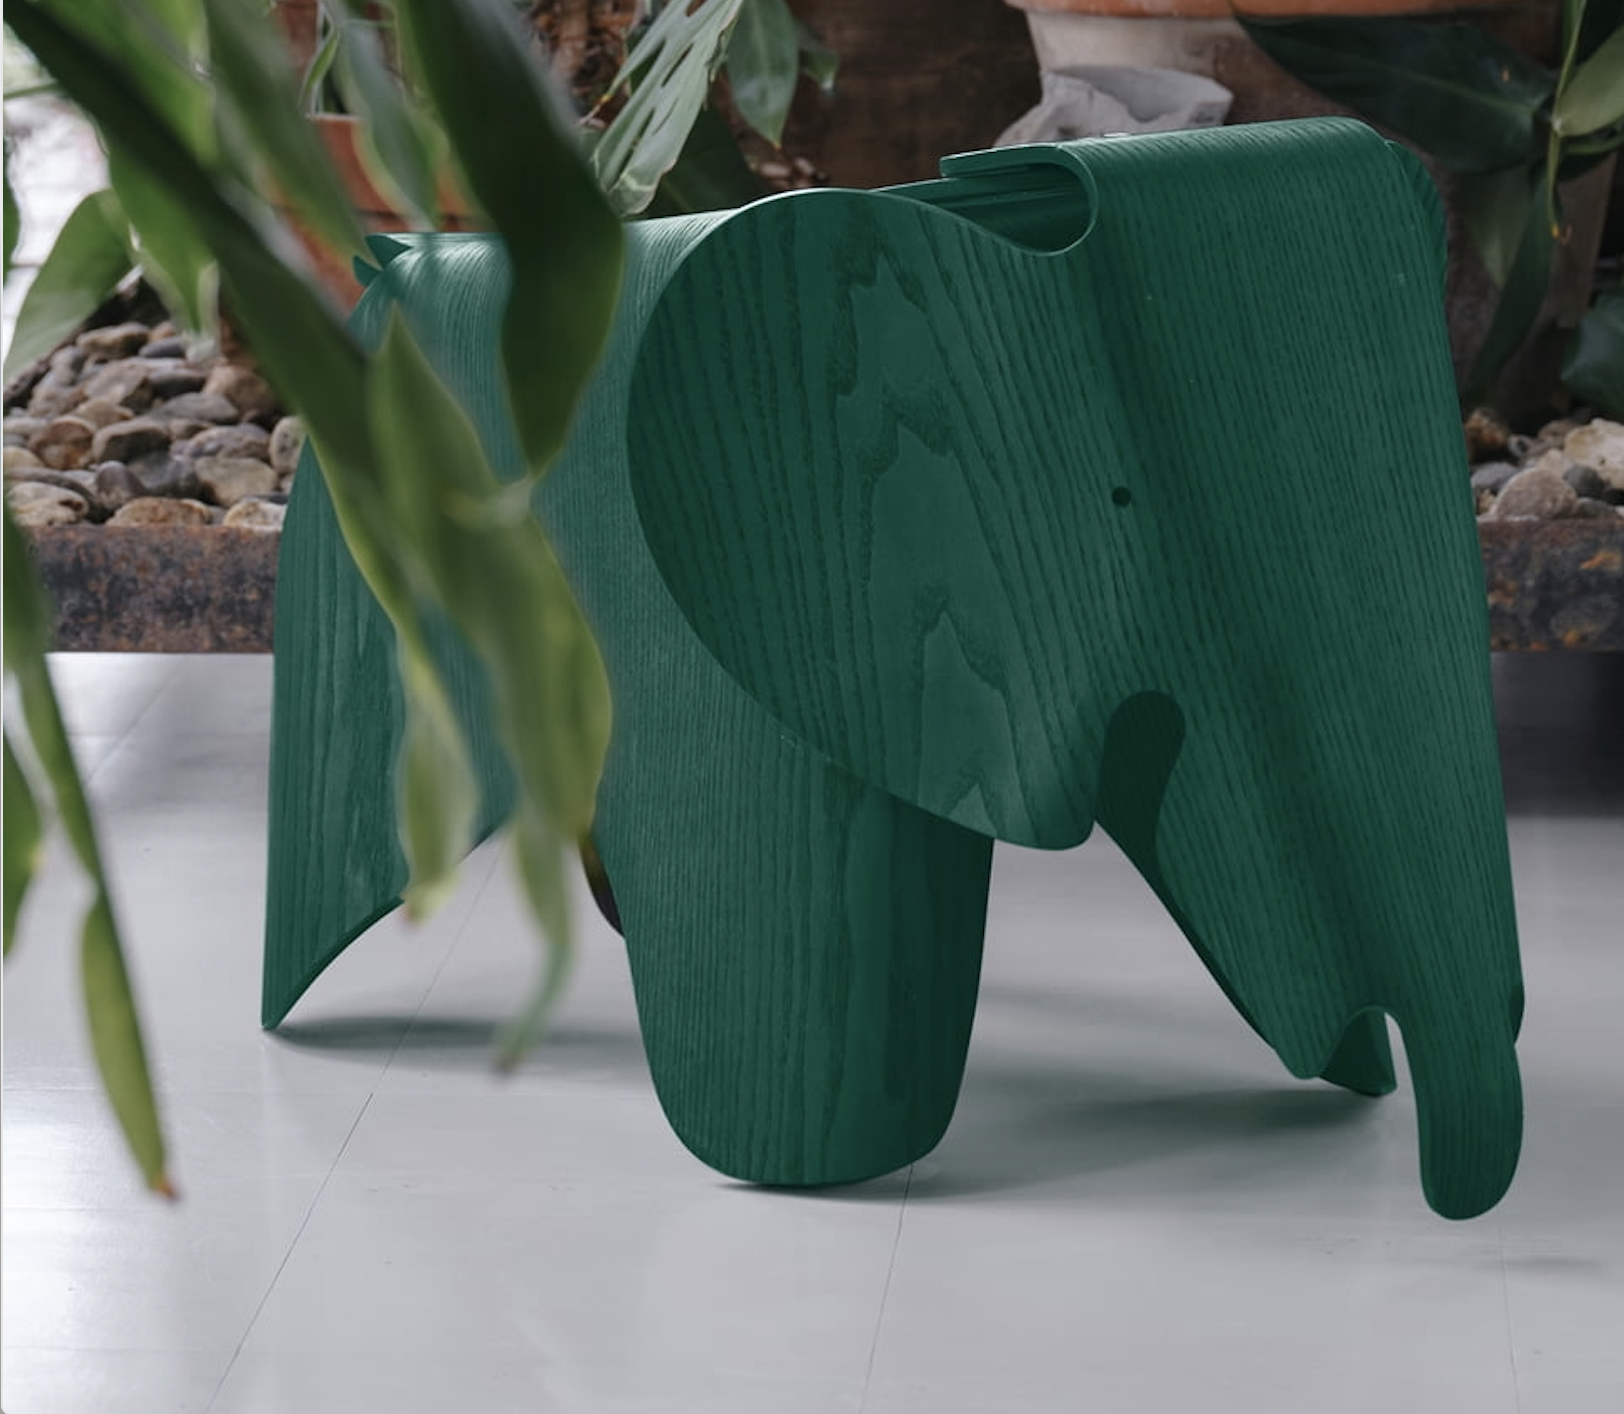 Limited Edition Eames Elephant in Green